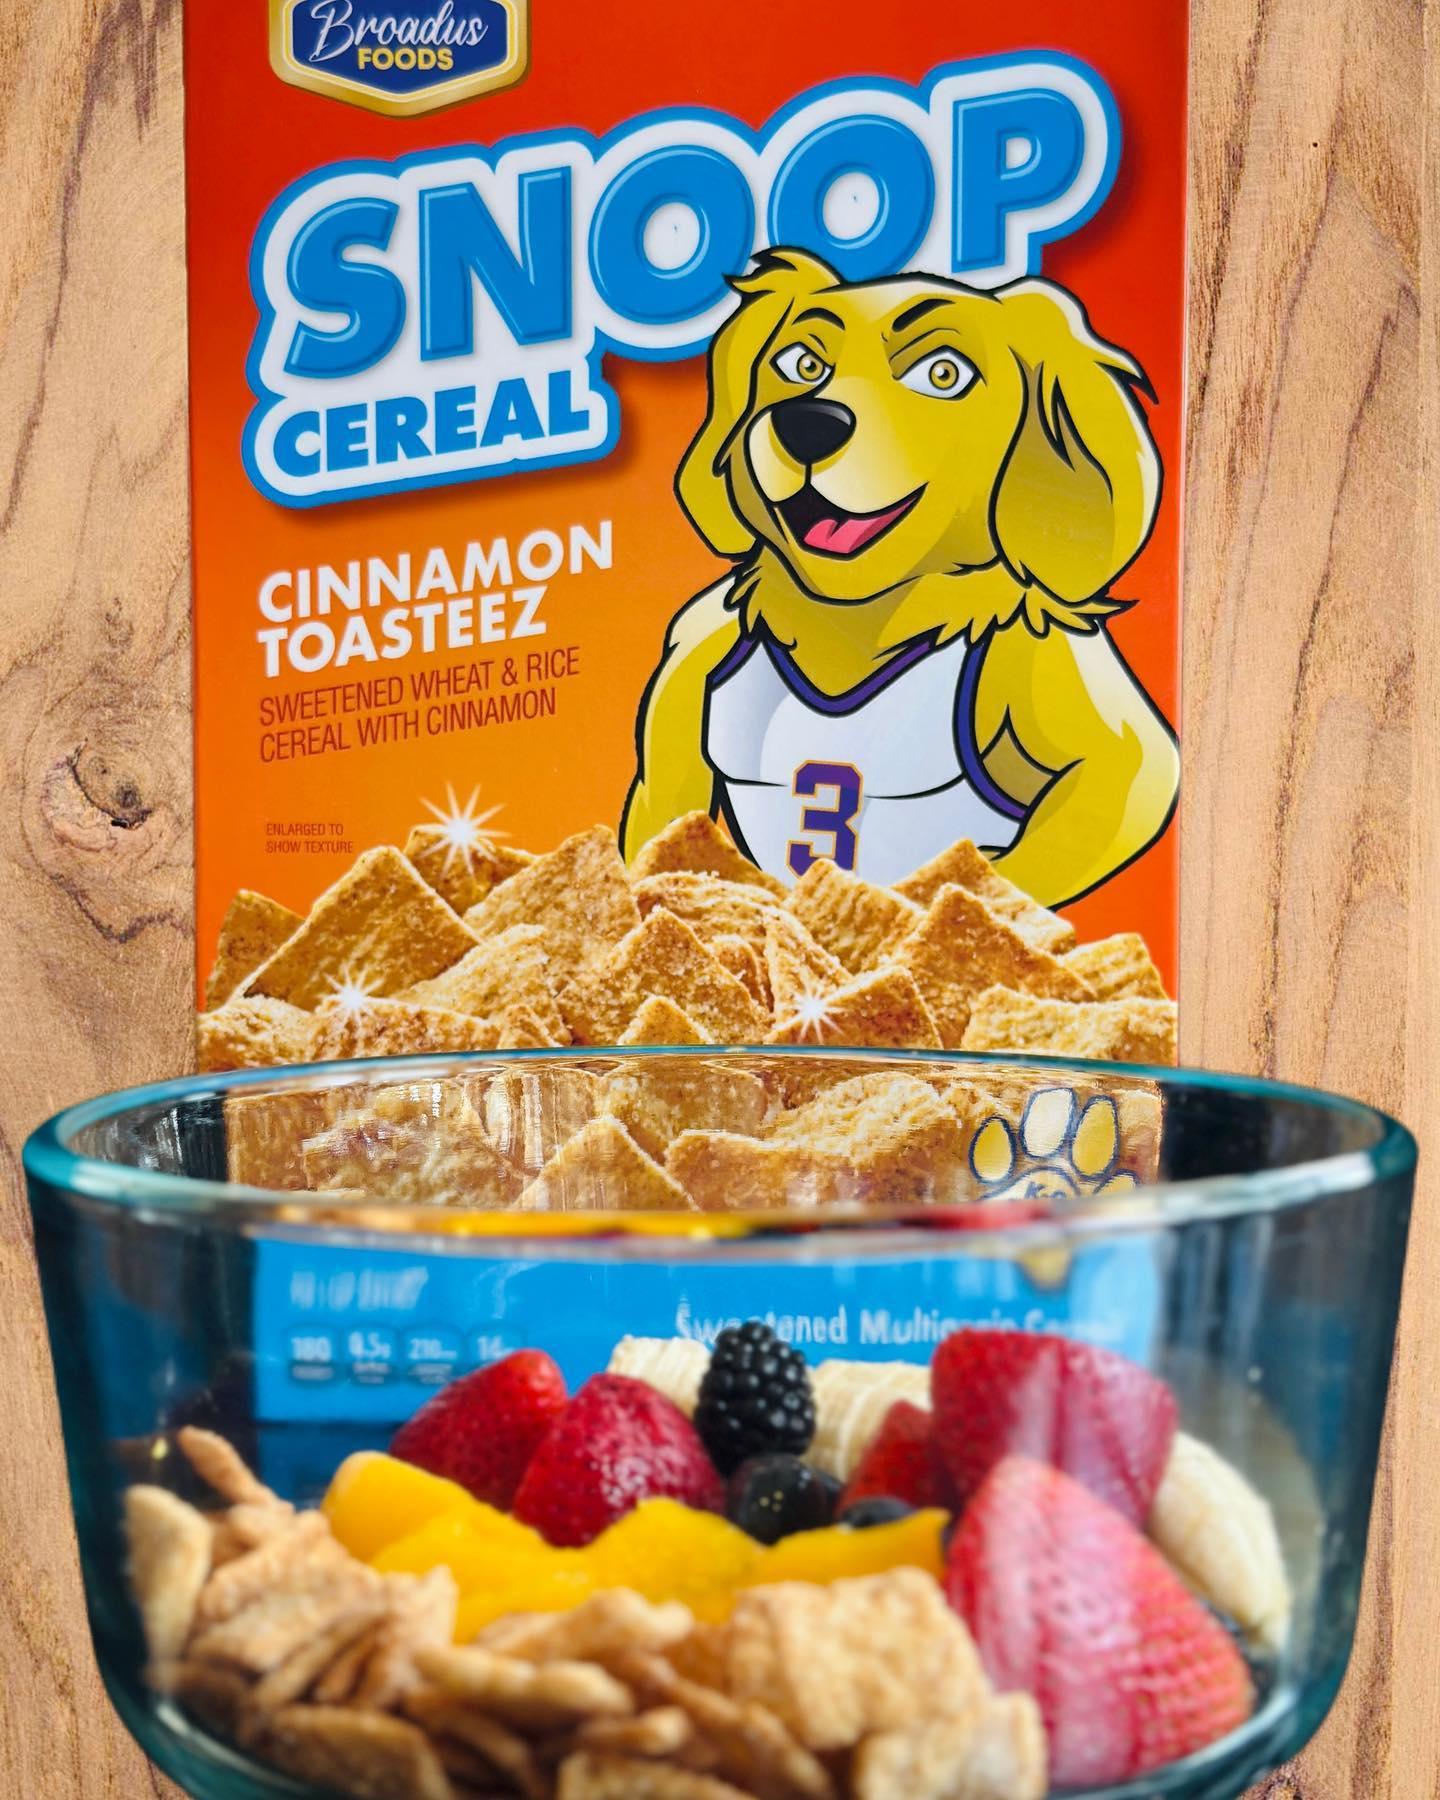 Master P and Snoop Dogg Are Bringing ‘Snoop Cereal’ To Stores This Summer